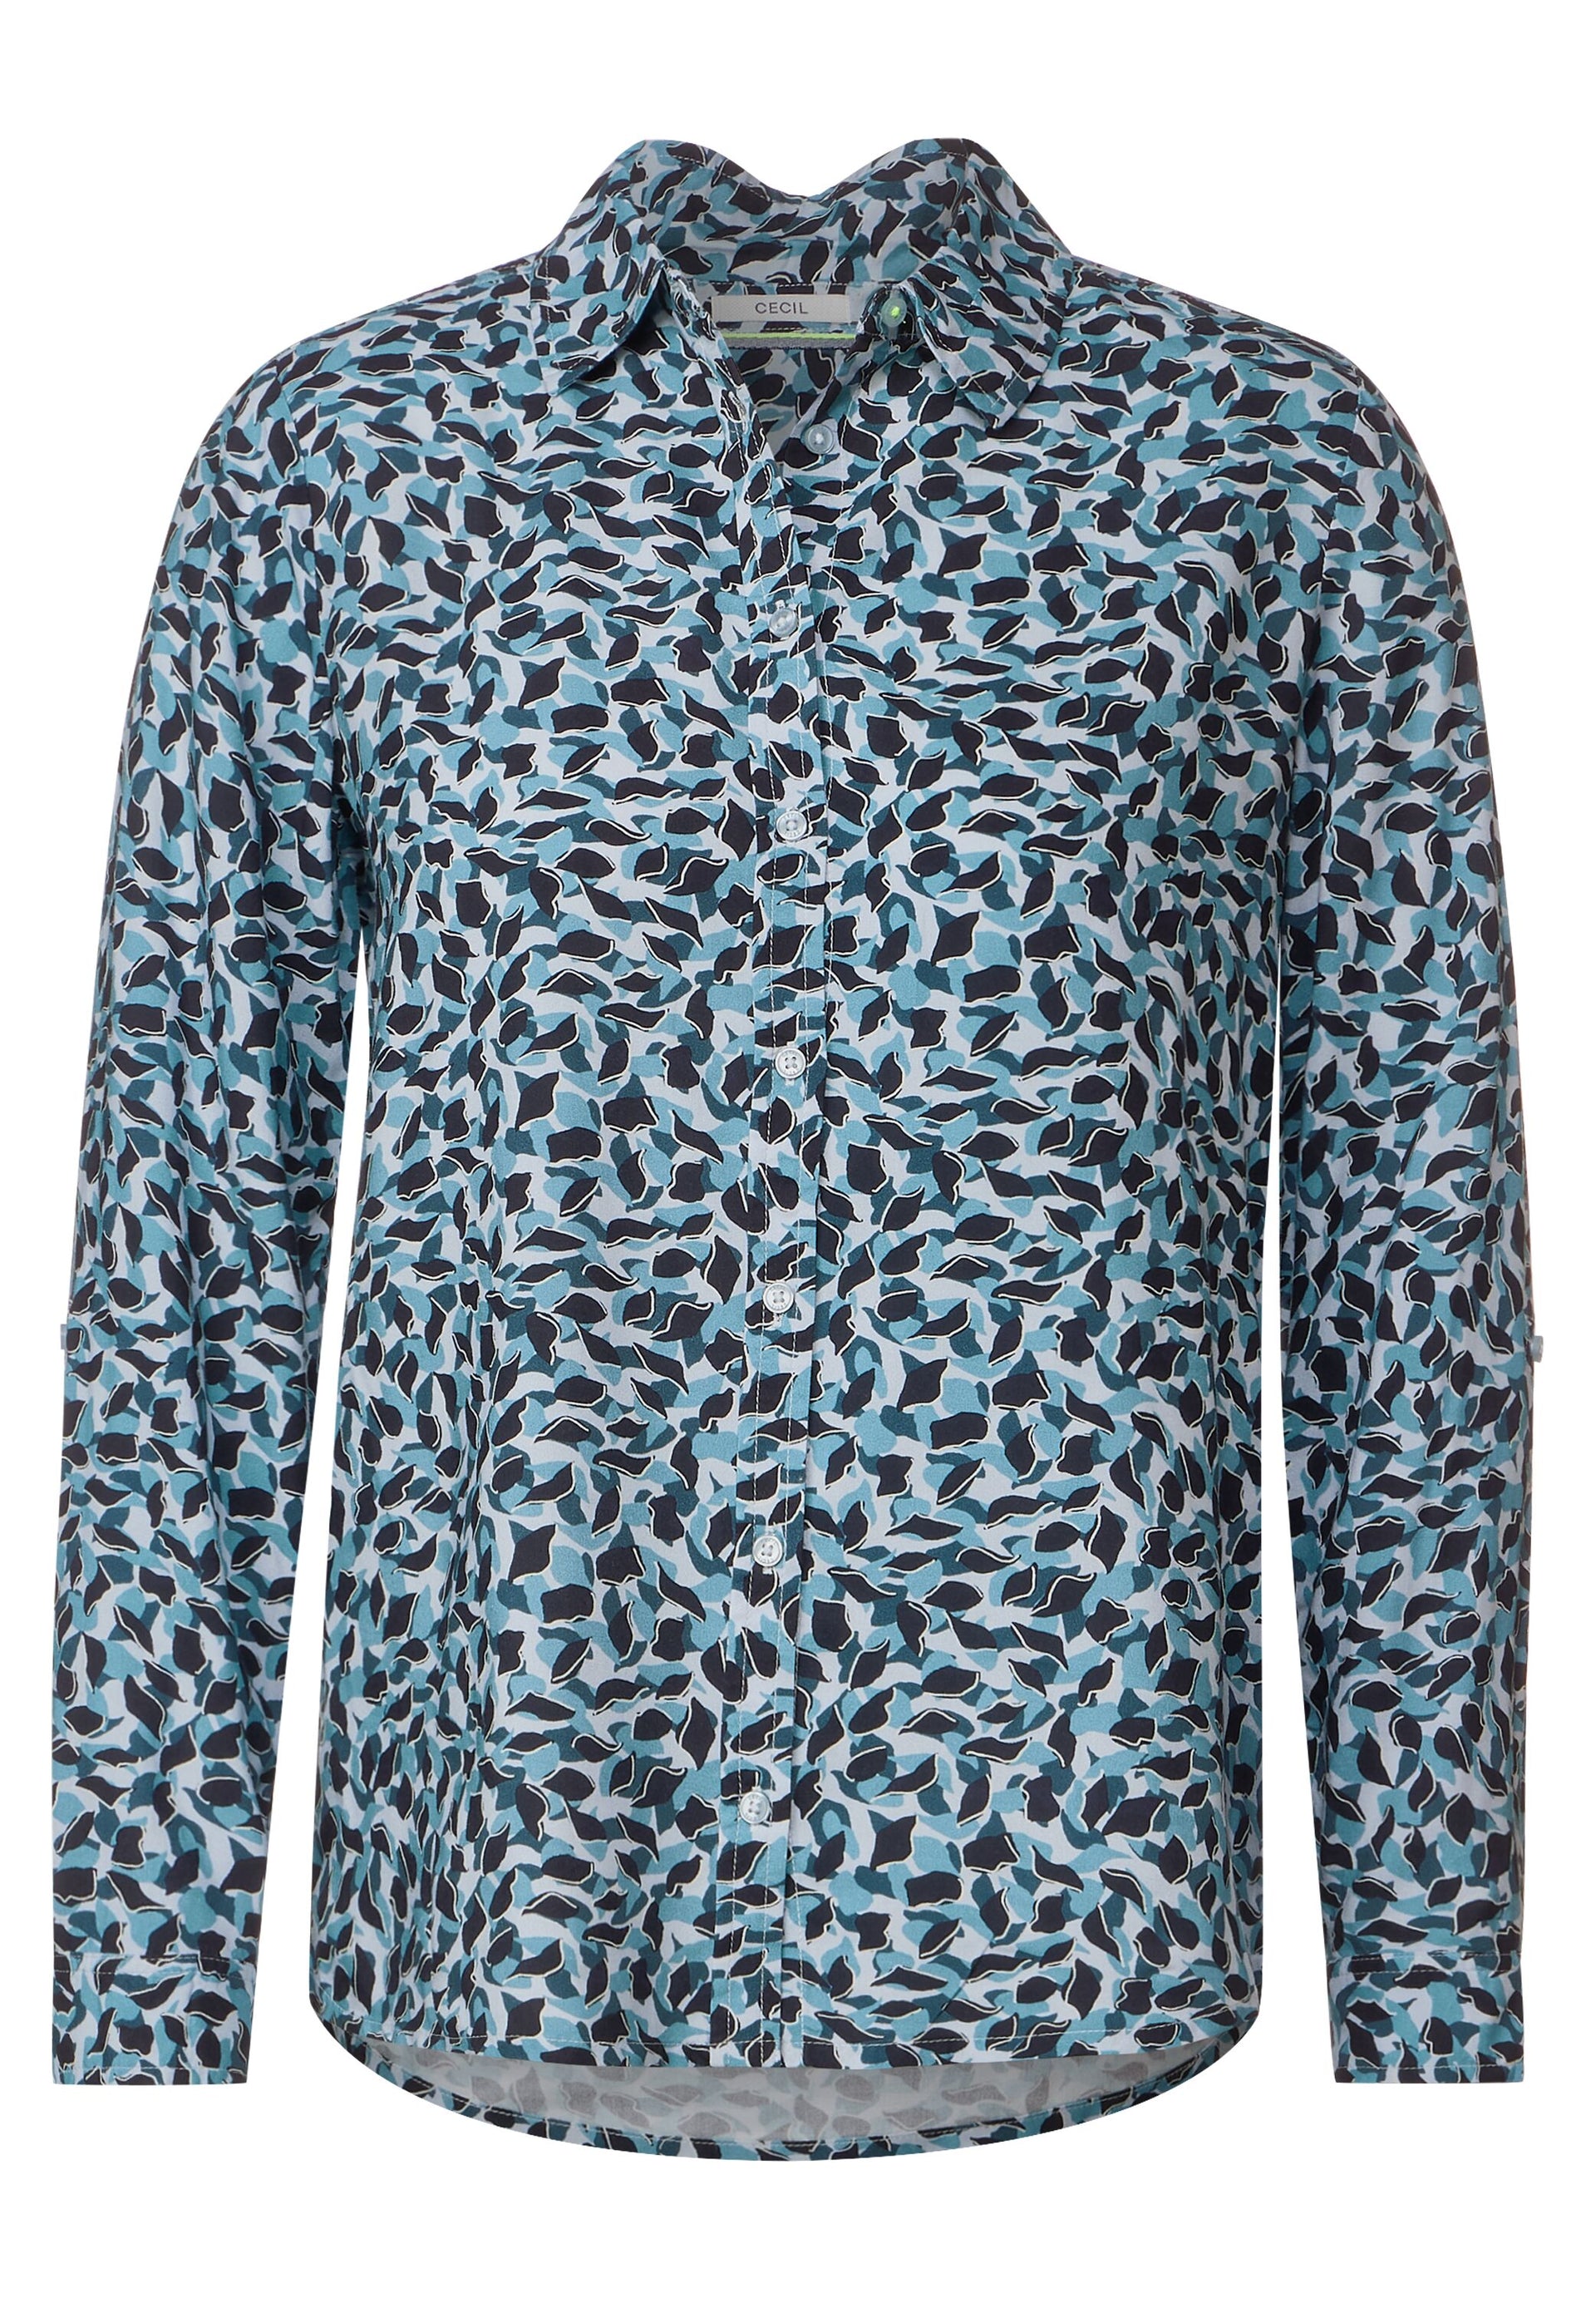 CECIL - Bluse Print - mit strong – Farbe: Mode TWISTY grafischem blue petrol